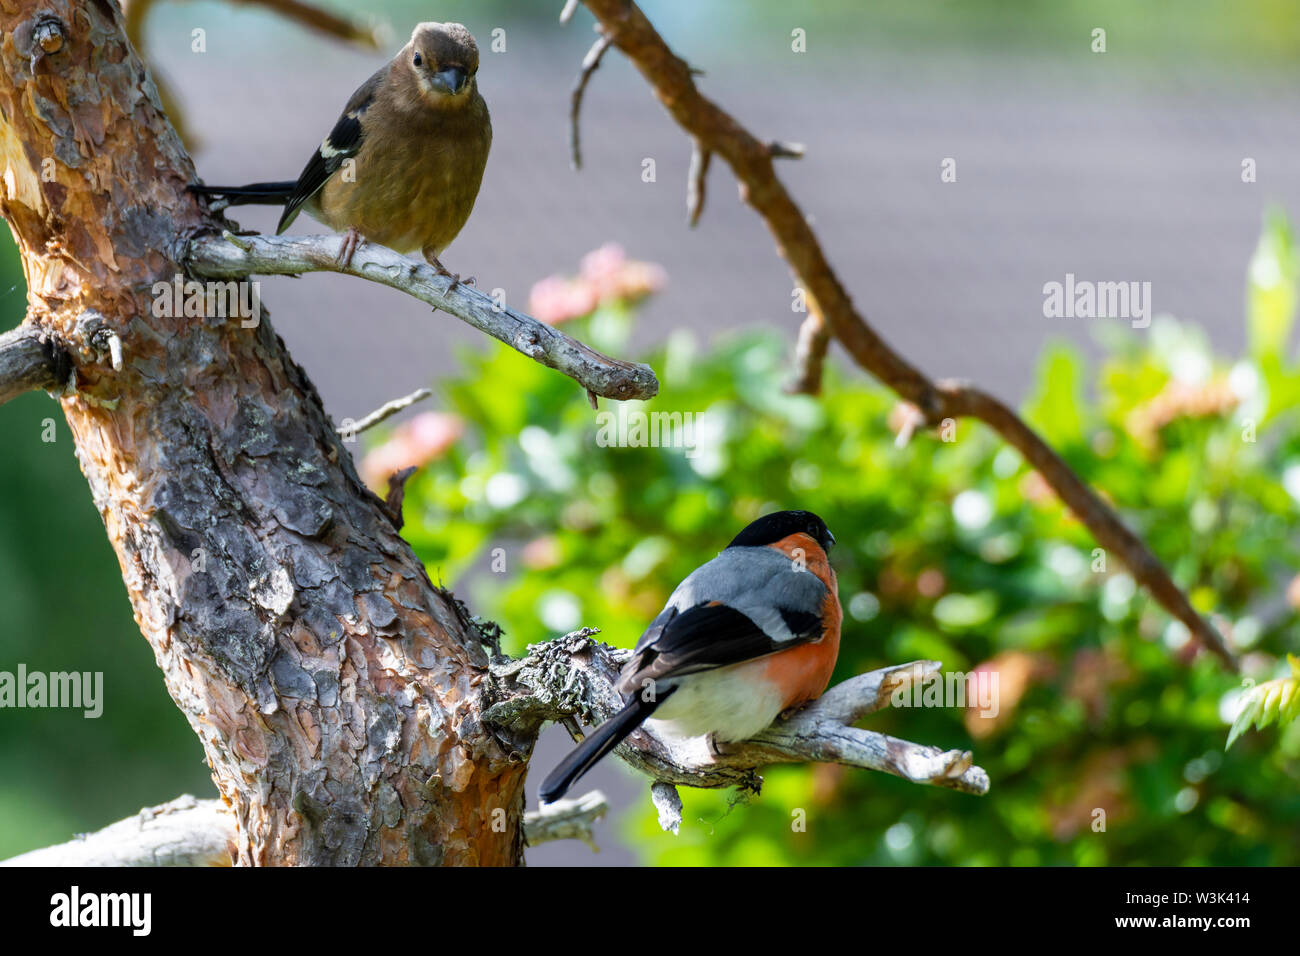 Male and female bullfinch (Pyrrhula pyrrhula) sitting on a pine branch with green foliage in background, picture from Northern Sweden. Stock Photo